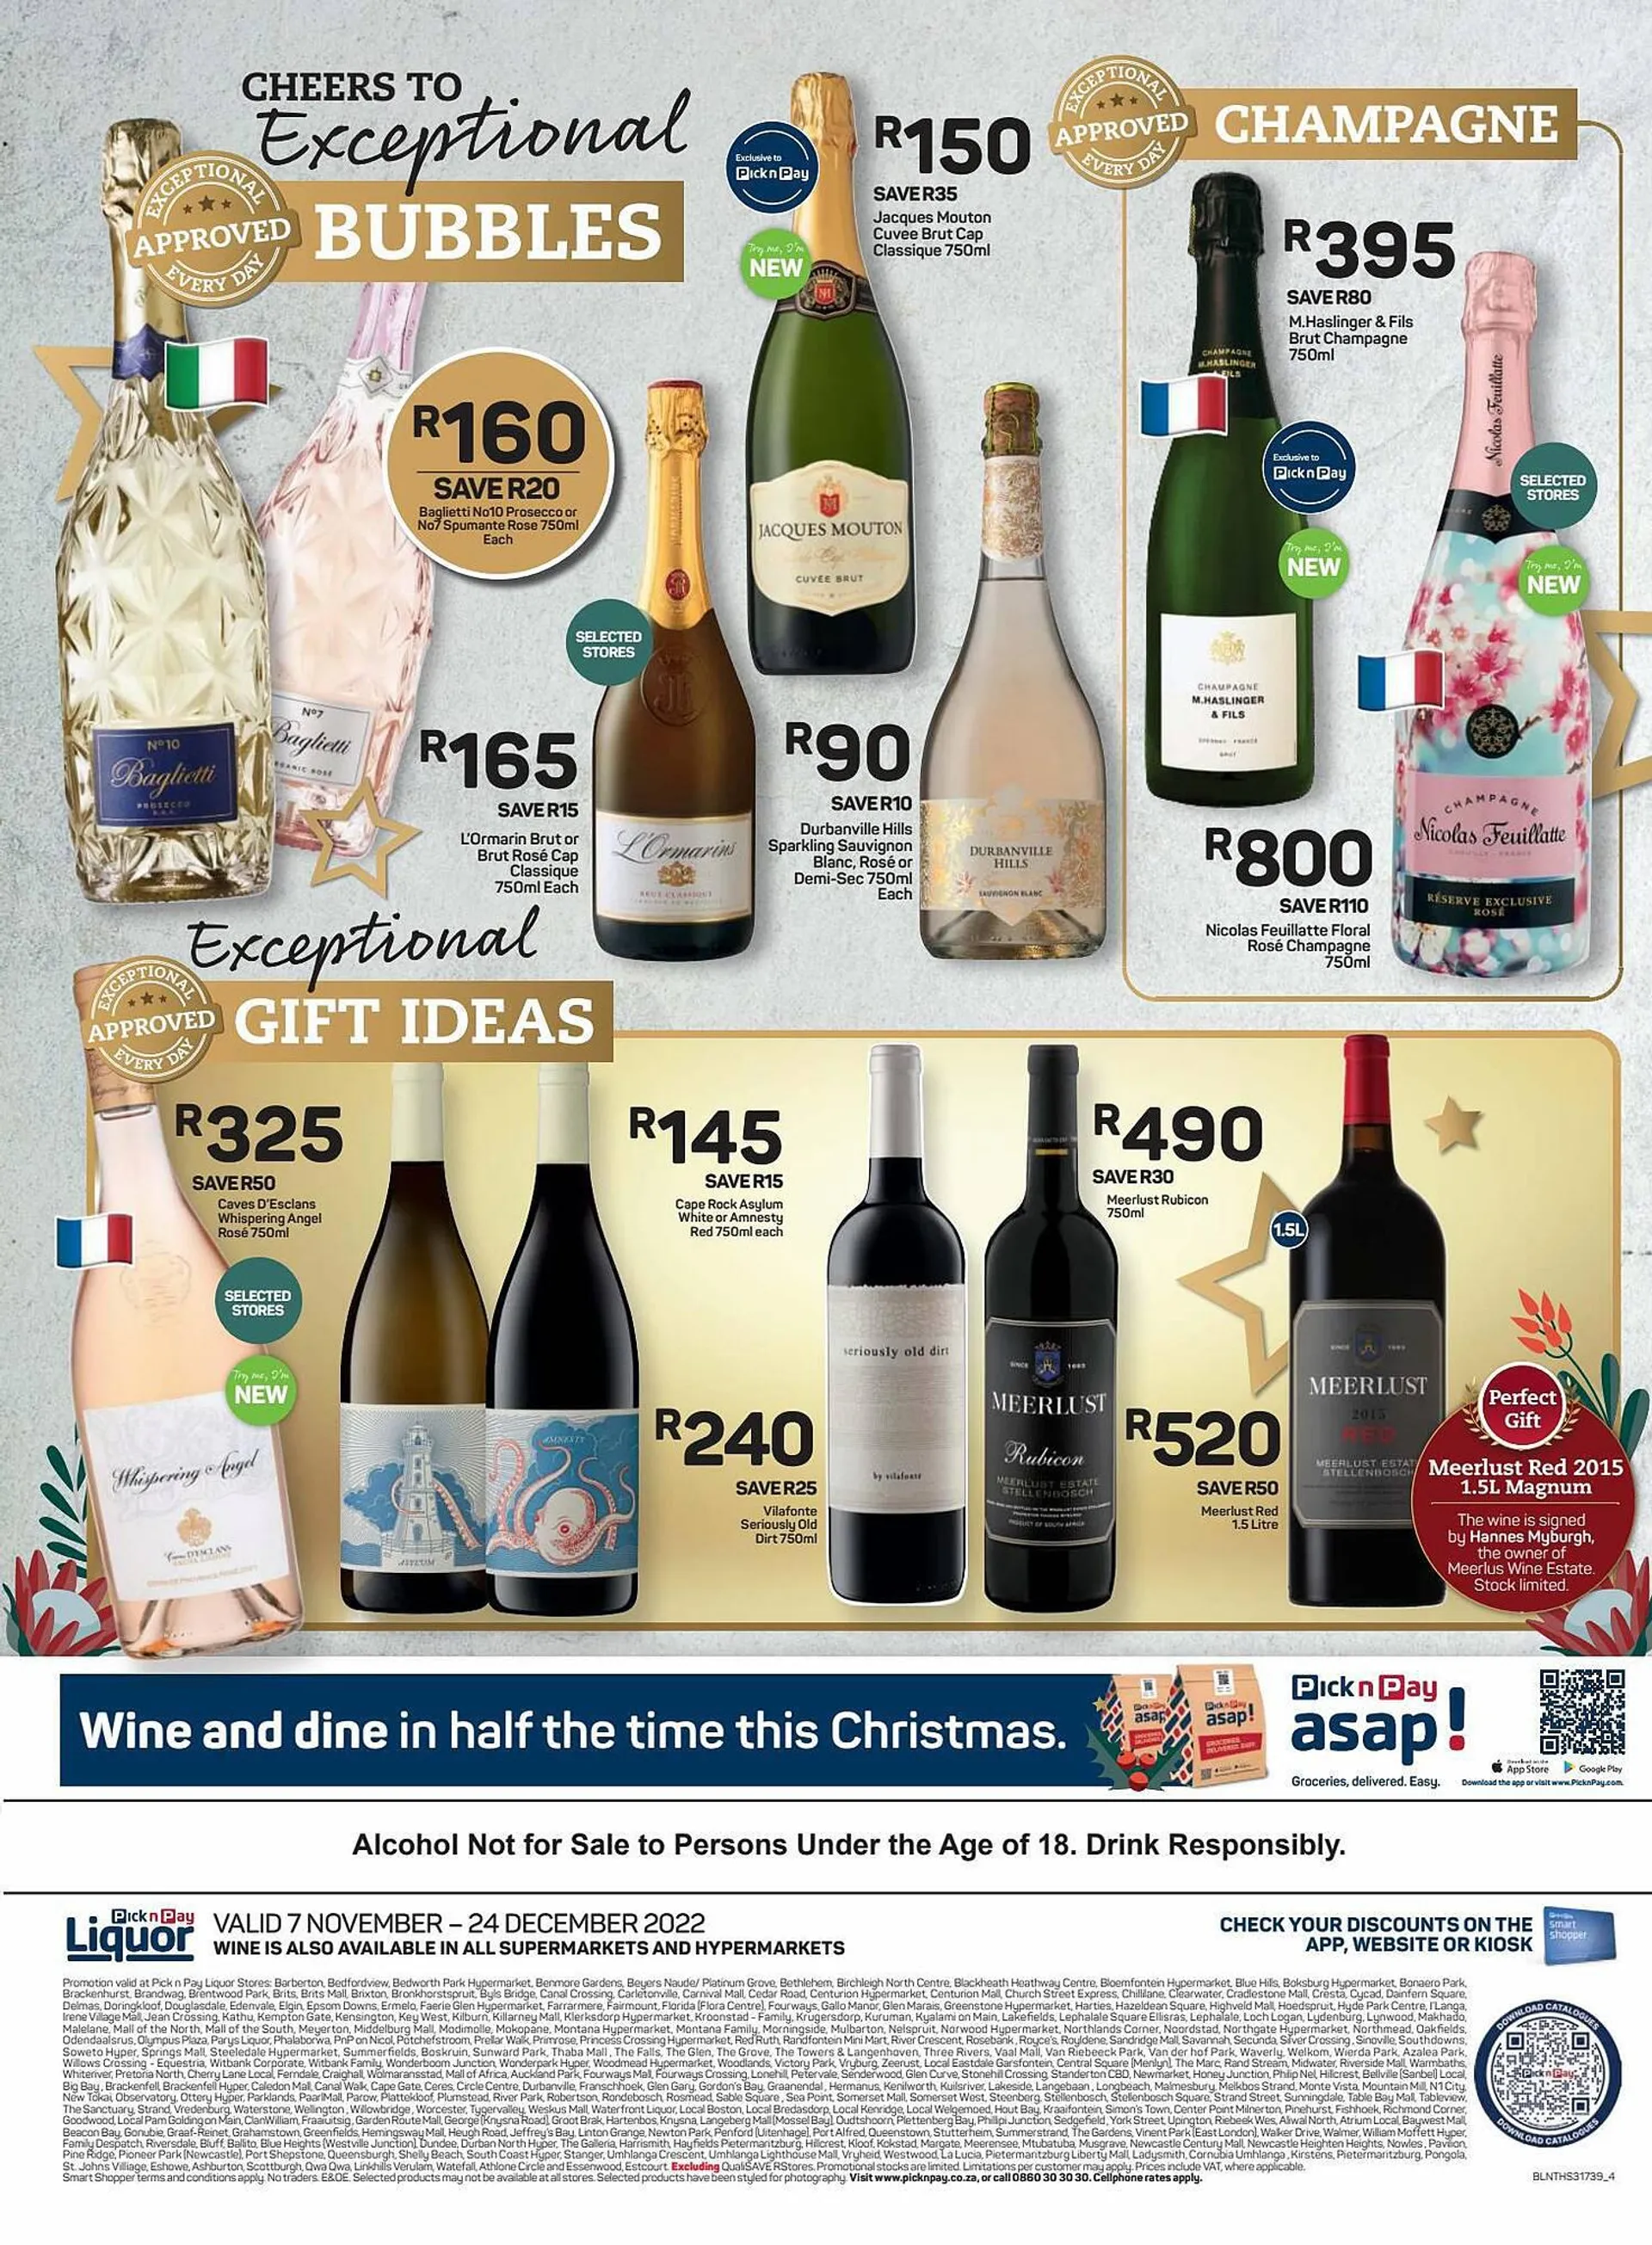 Pick n Pay catalogue - Wine guide - 4